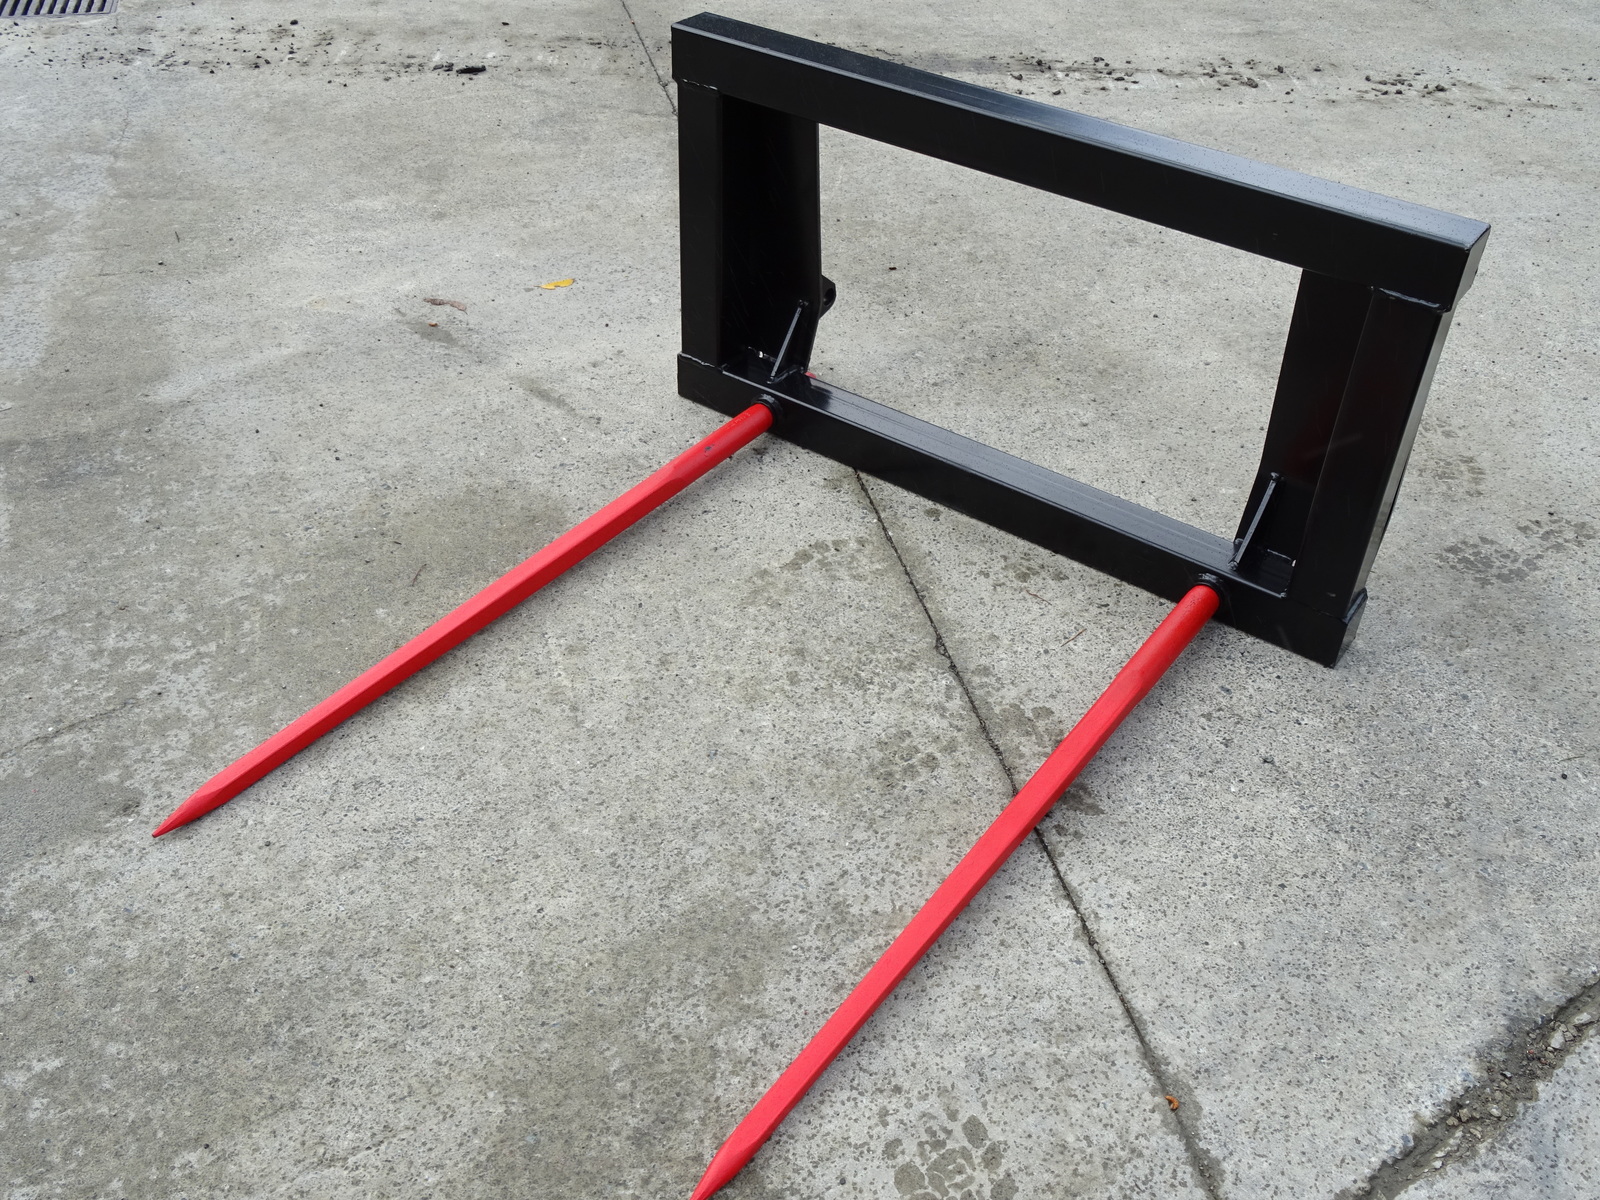 Euro Hitch Bale forks